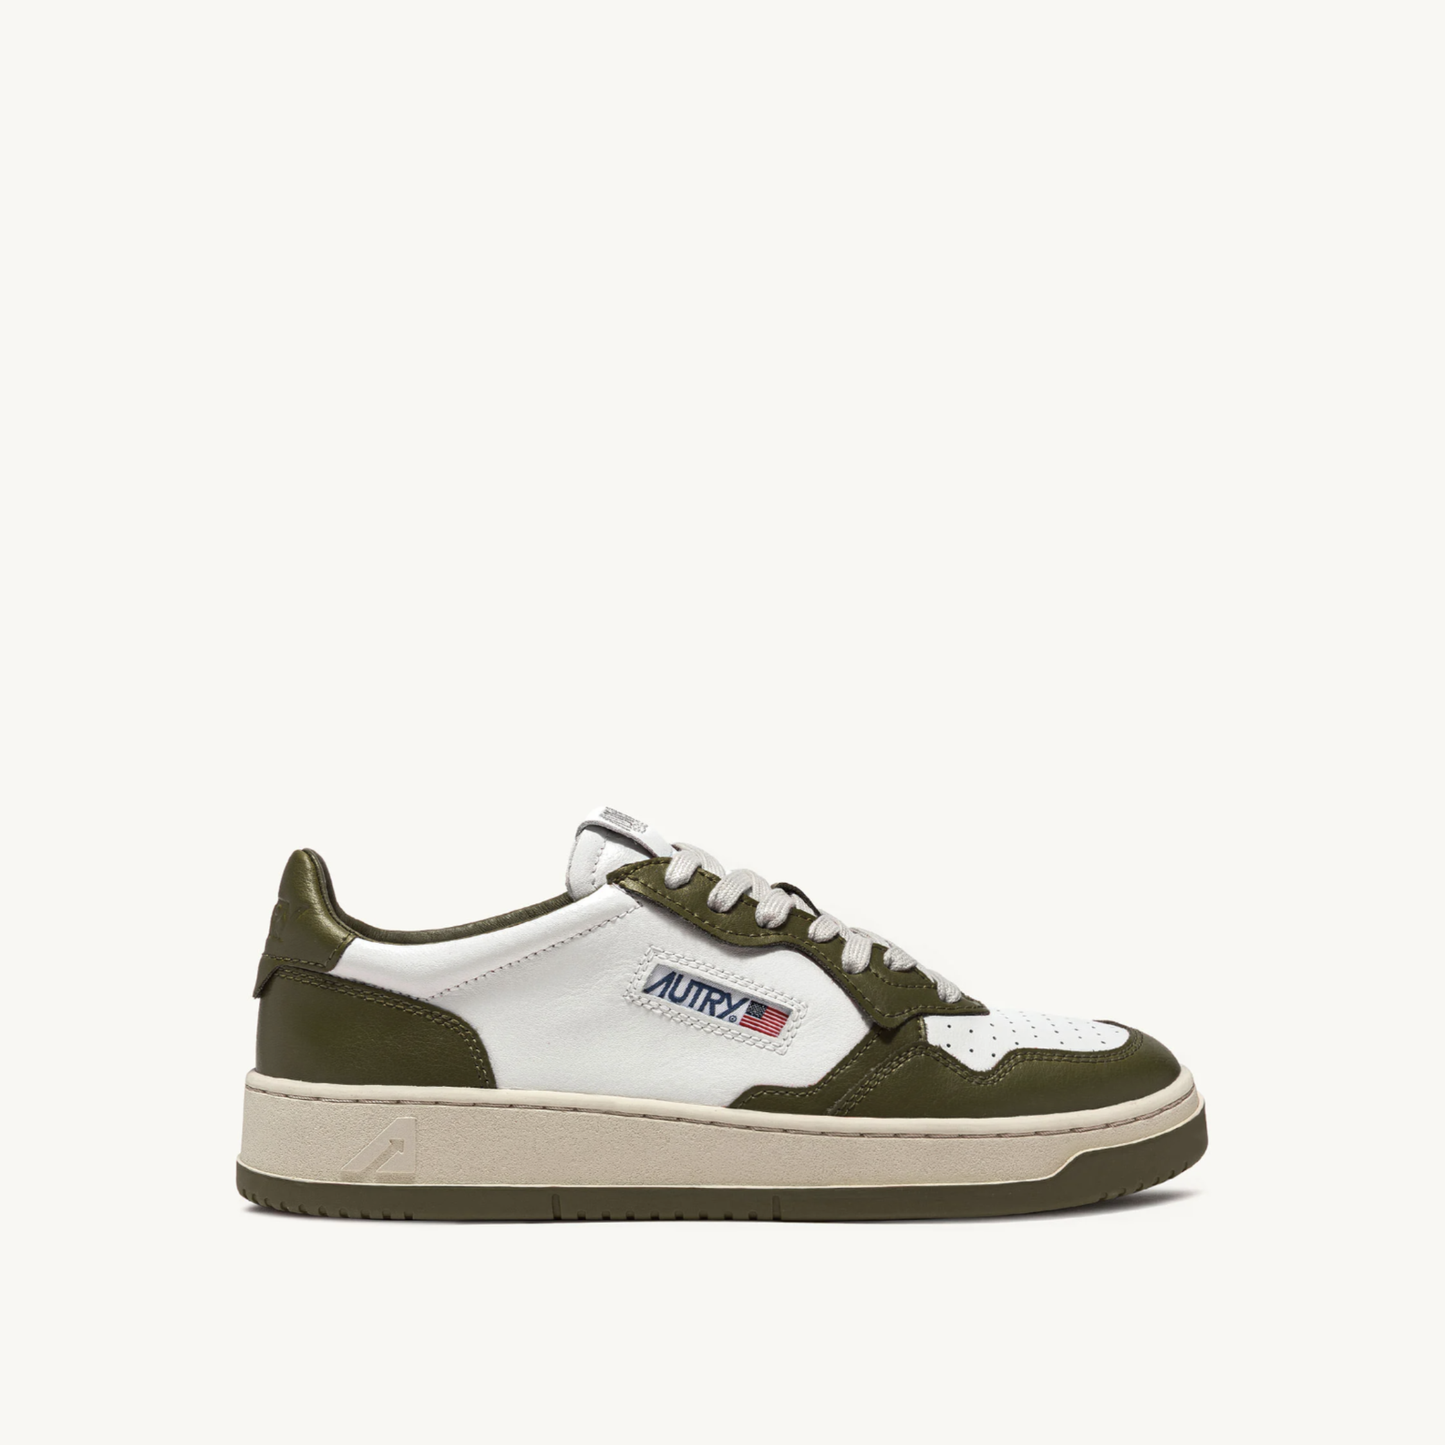 MEDALIST LOW WB33 LEATHER WHITE/OLIVE